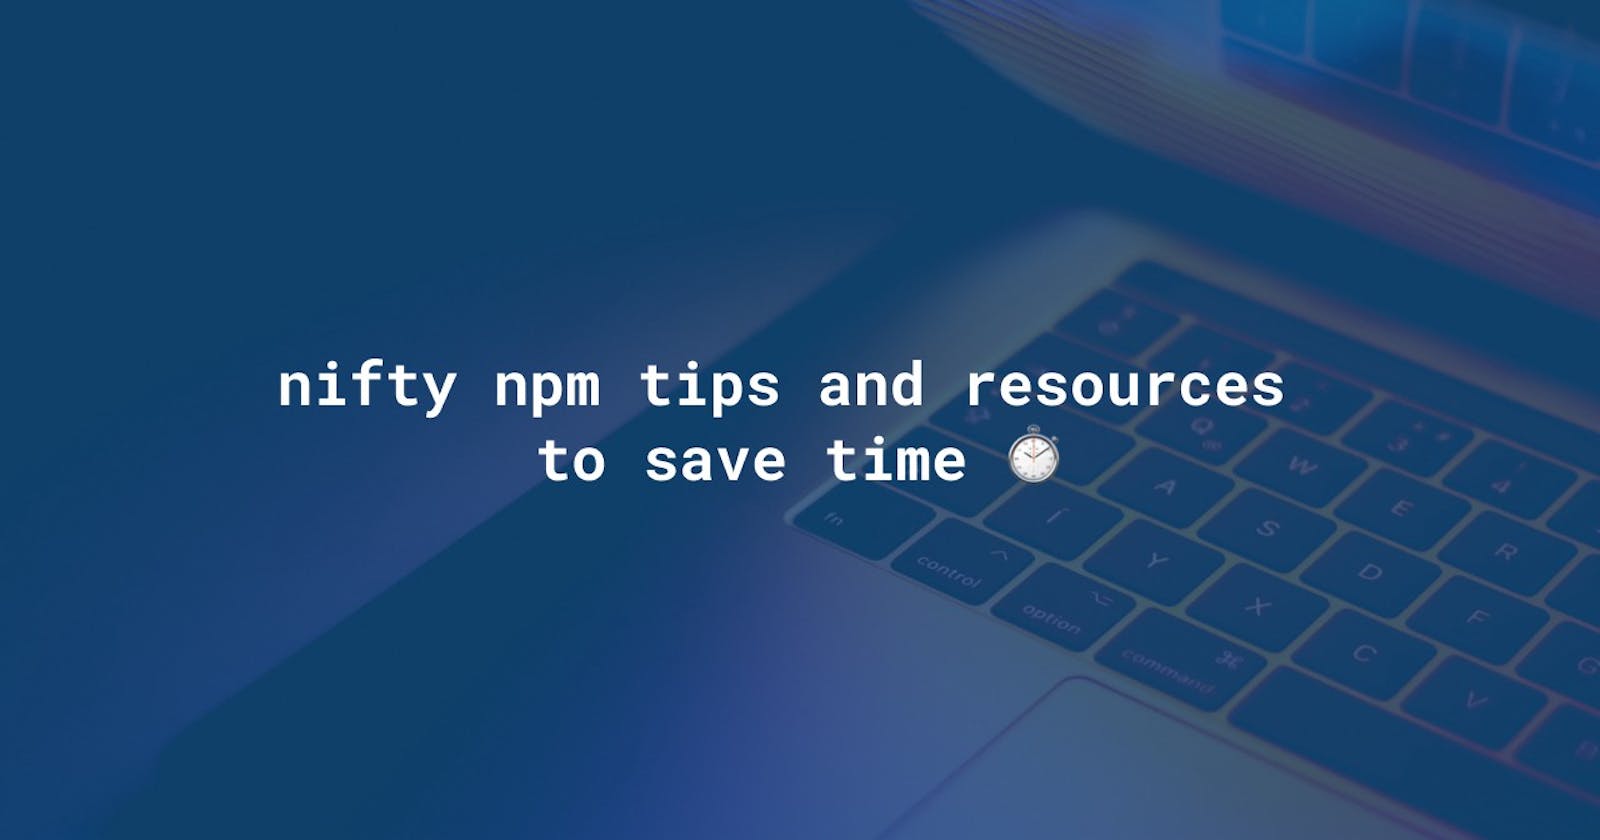 nifty npm tips and resources to save time